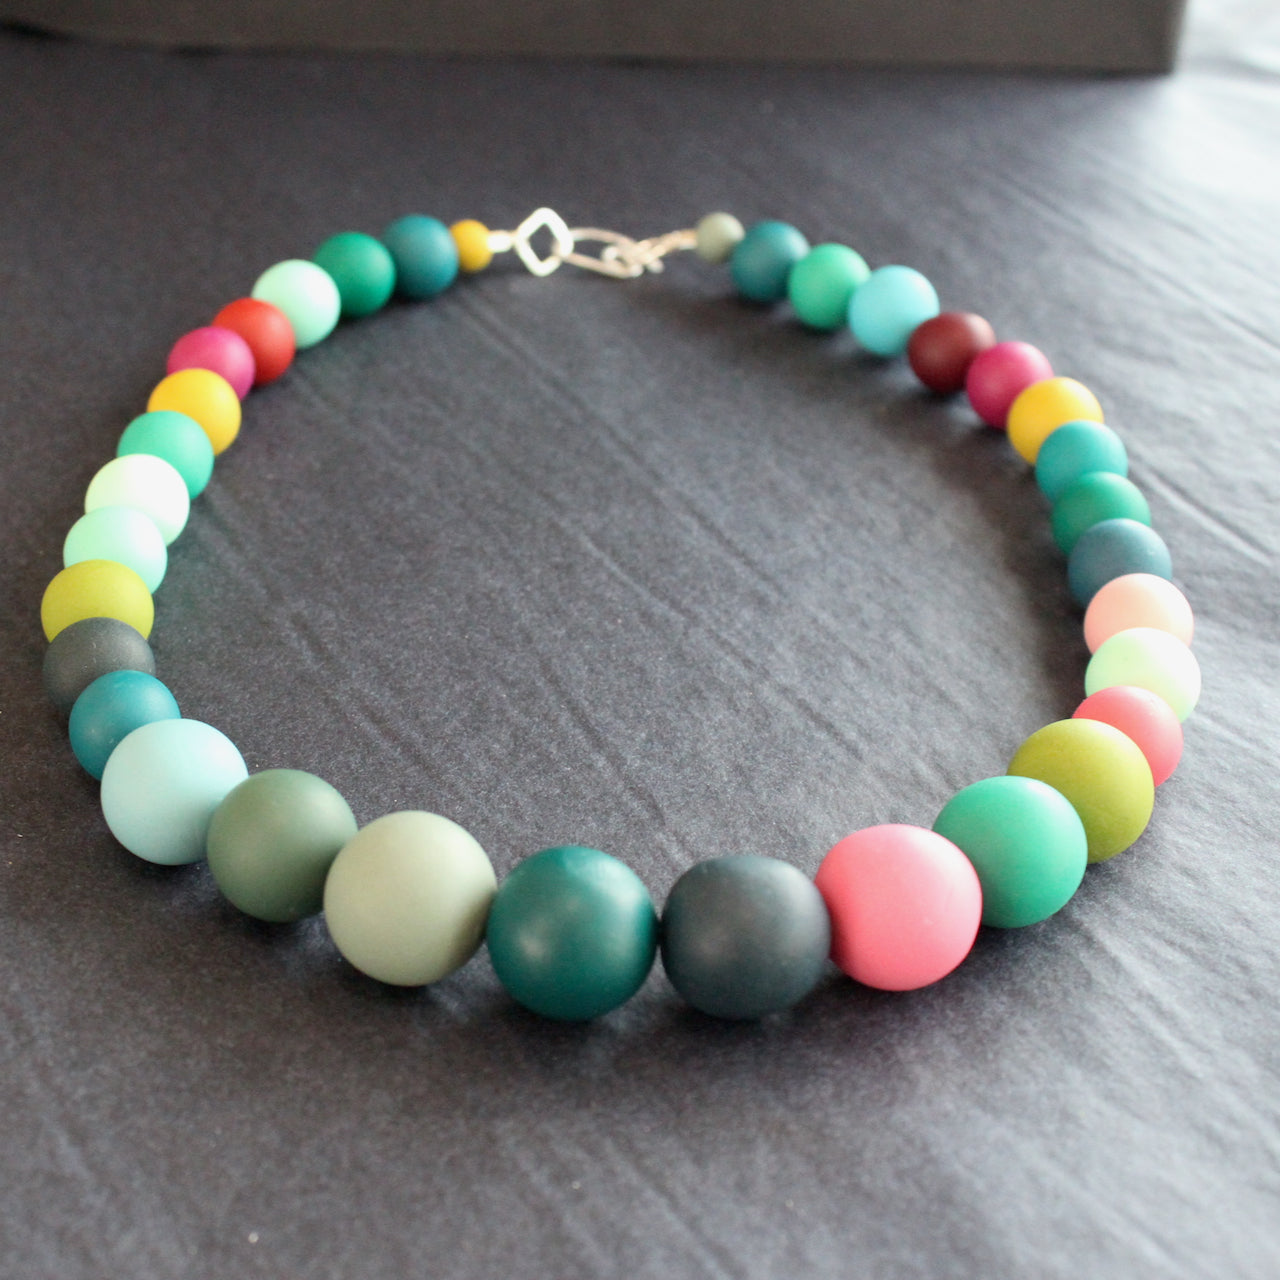 a Claire Lloyd necklace of round beads in greens, pinks, blues and yellow.